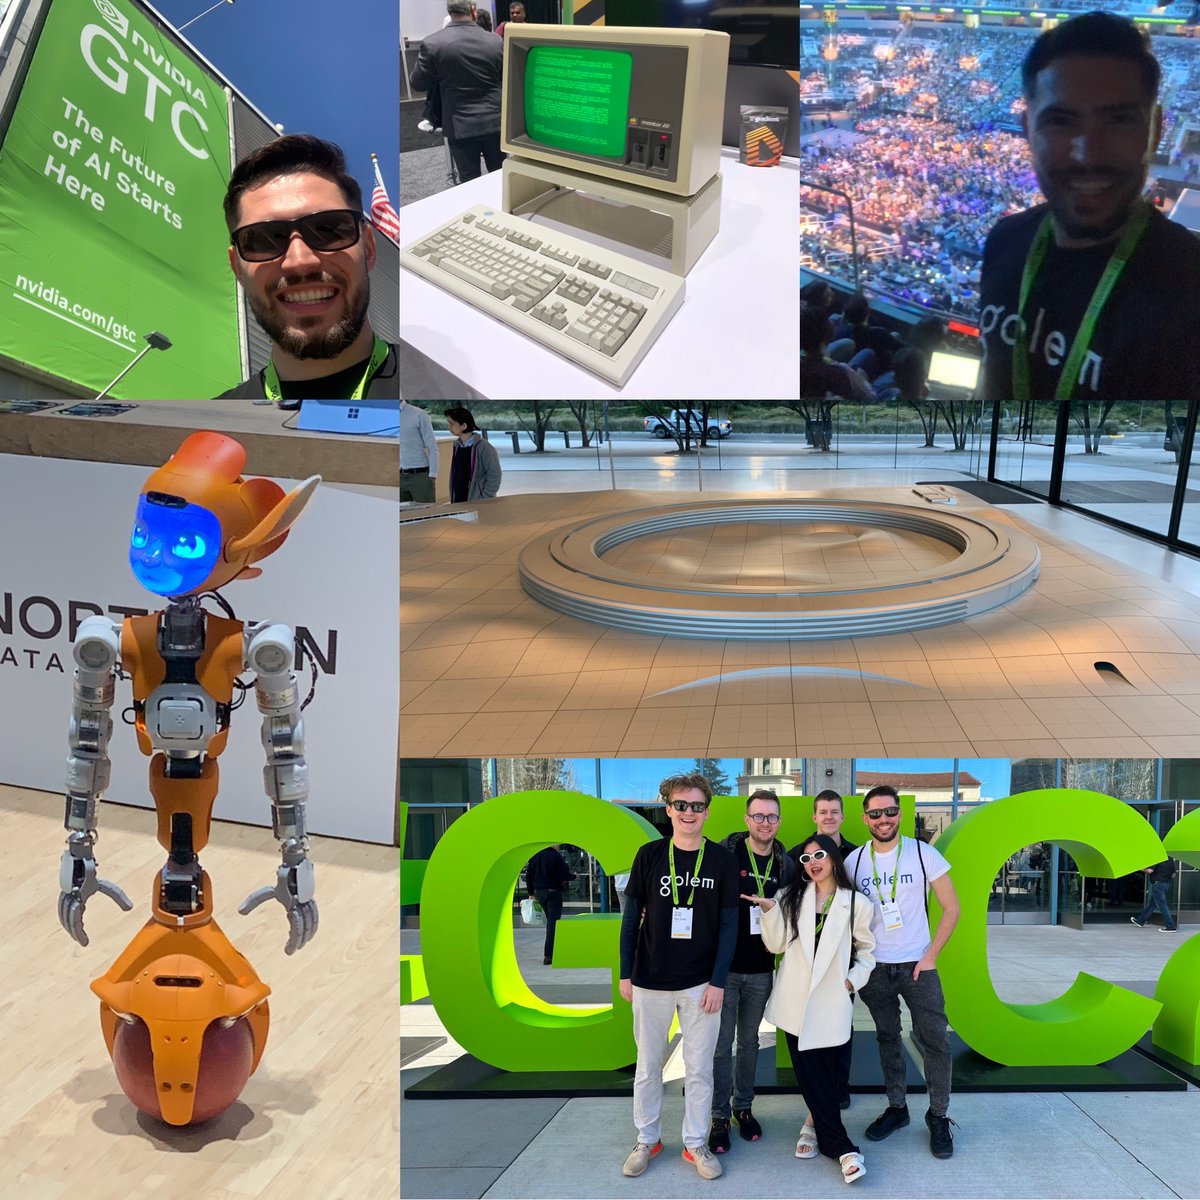 It's now almost a week since my return from NVIDIA GTC, and guess what? It was nothing short of amazing! The energy was electric, and I'm thrilled to share some personal takeaways from our journey with the @golemproject , check my recap from $GLM team on tour! We set foot at…